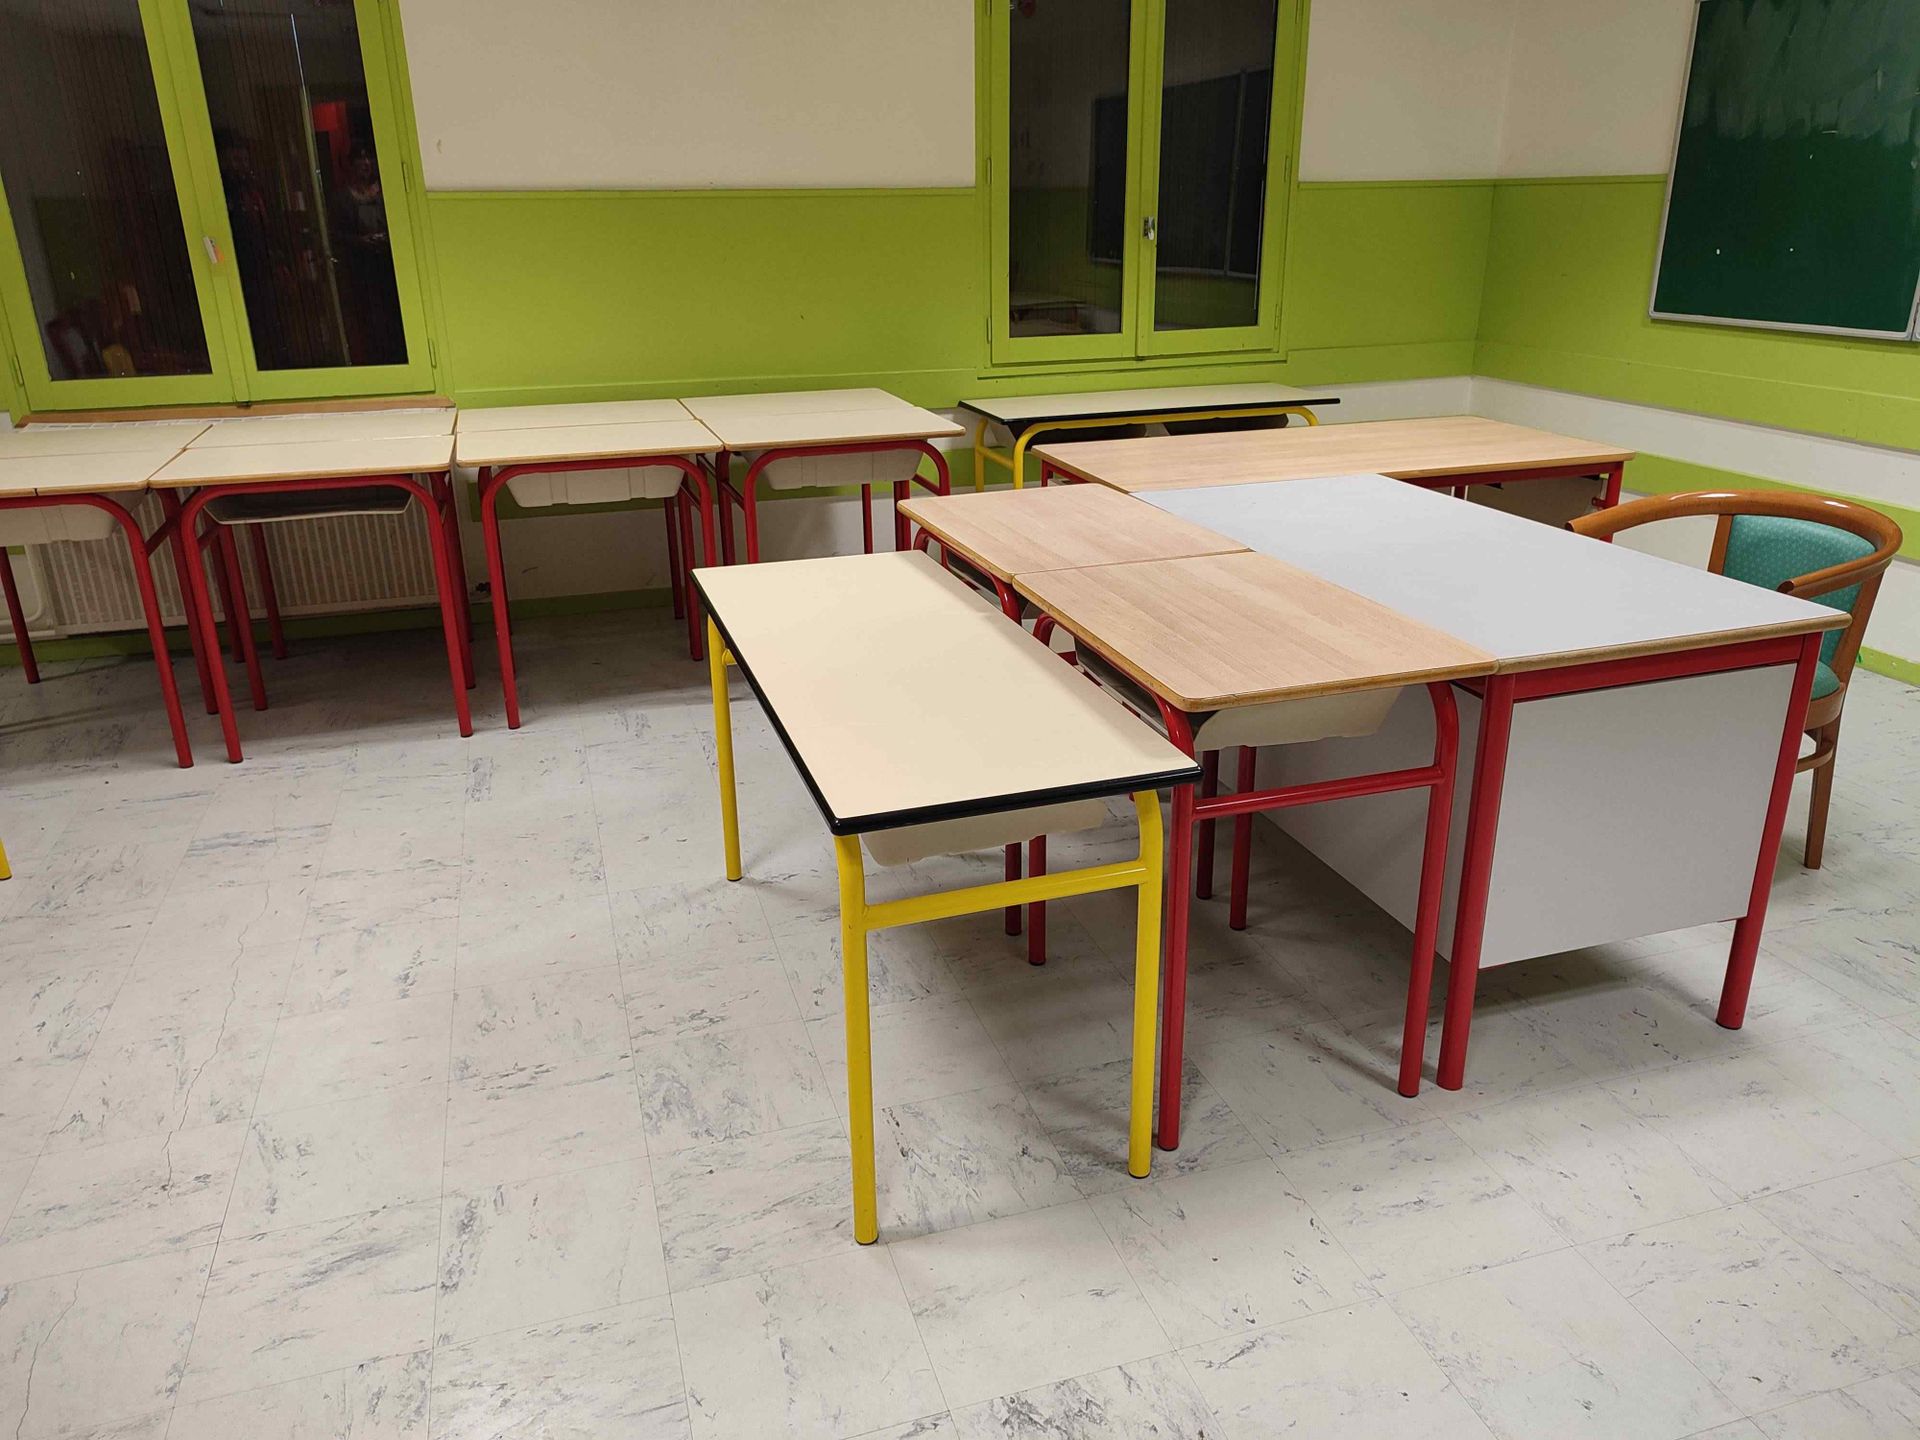 Null Classroom furniture set in used condition including:
- 14 chairs (various m&hellip;